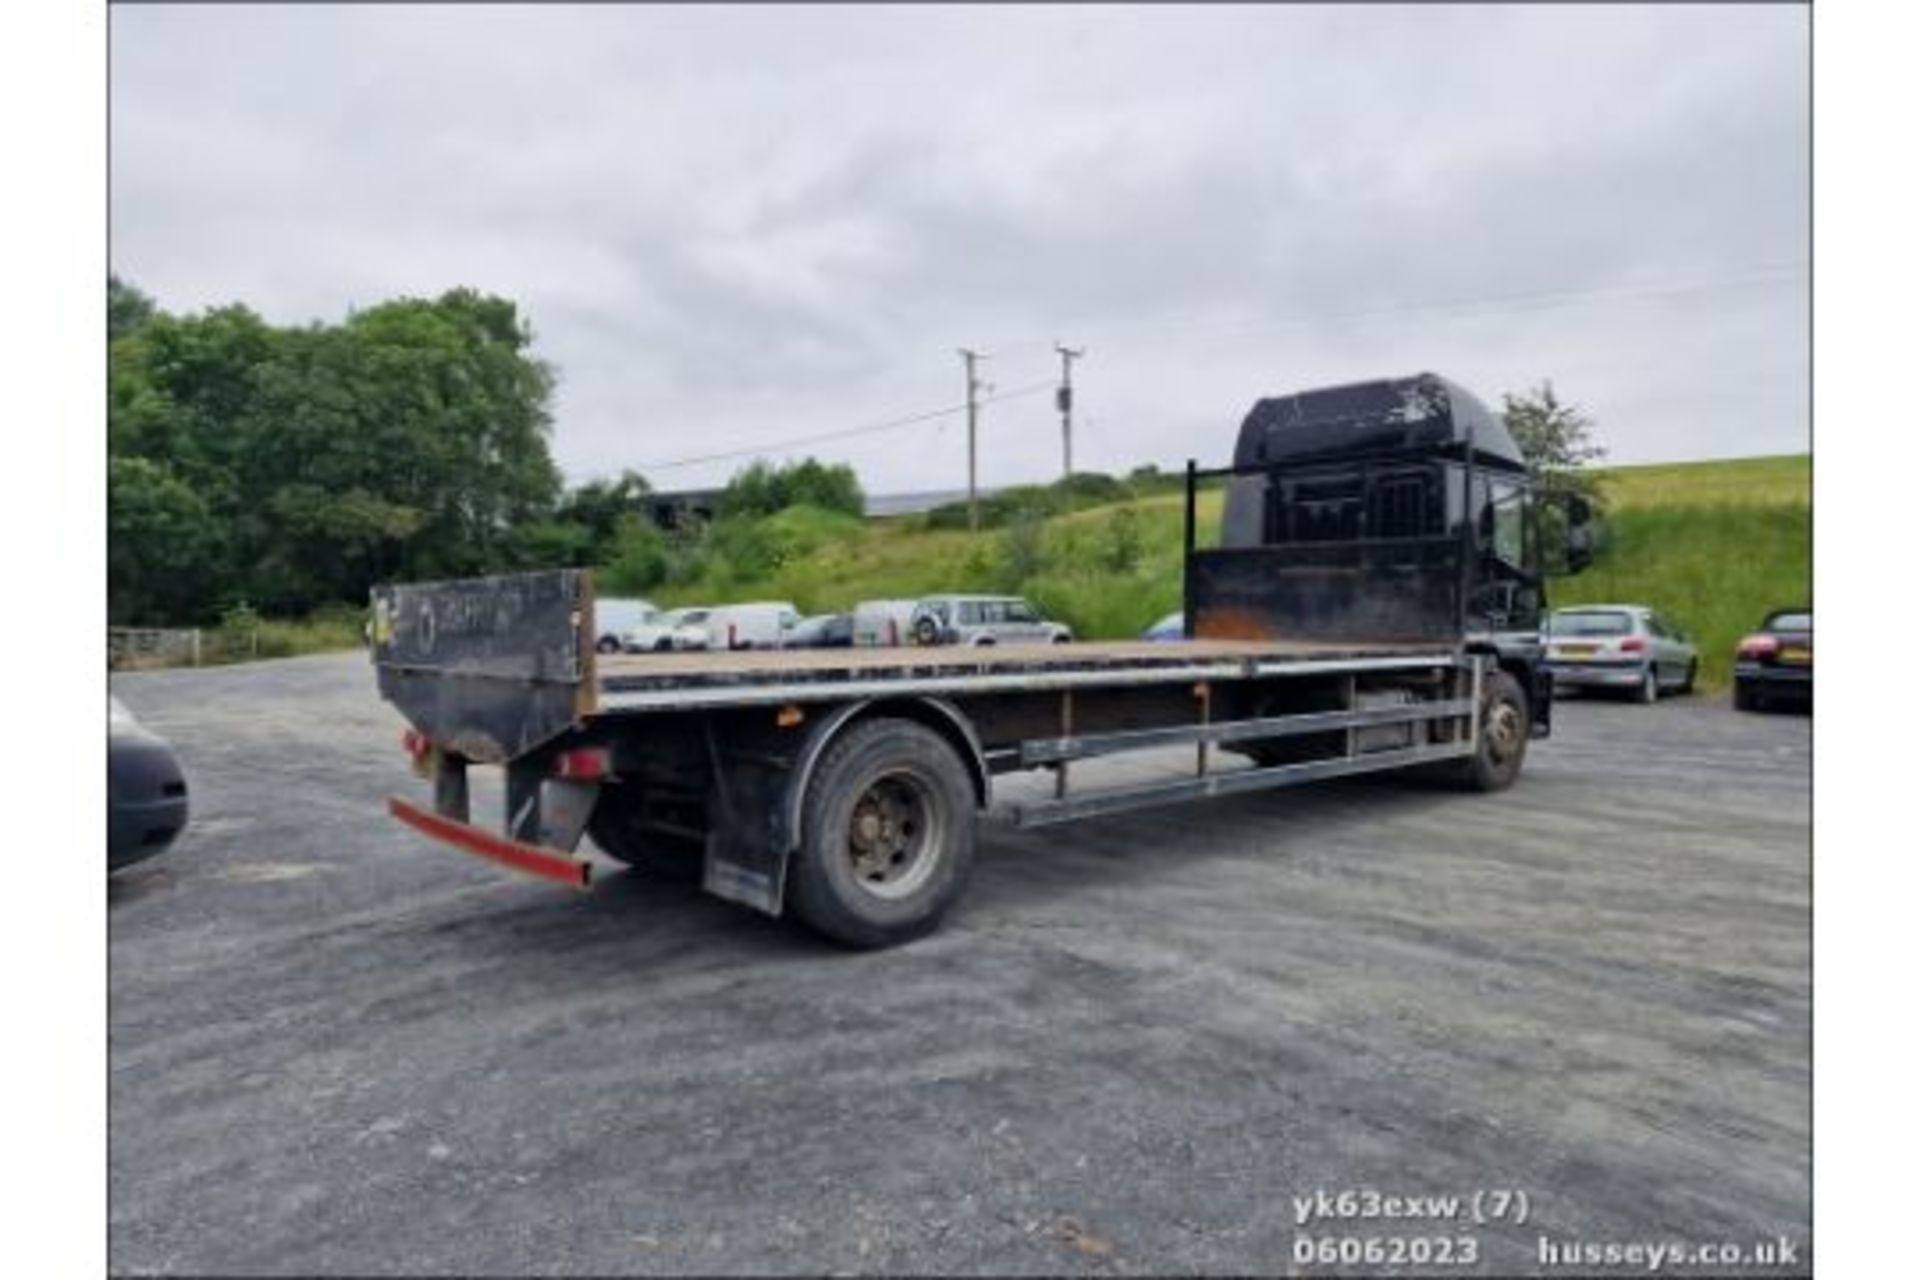 13/63 IVECO EUROCARGO (MY 2008) - 5880cc 2dr Flat Bed (Black) - Image 7 of 21